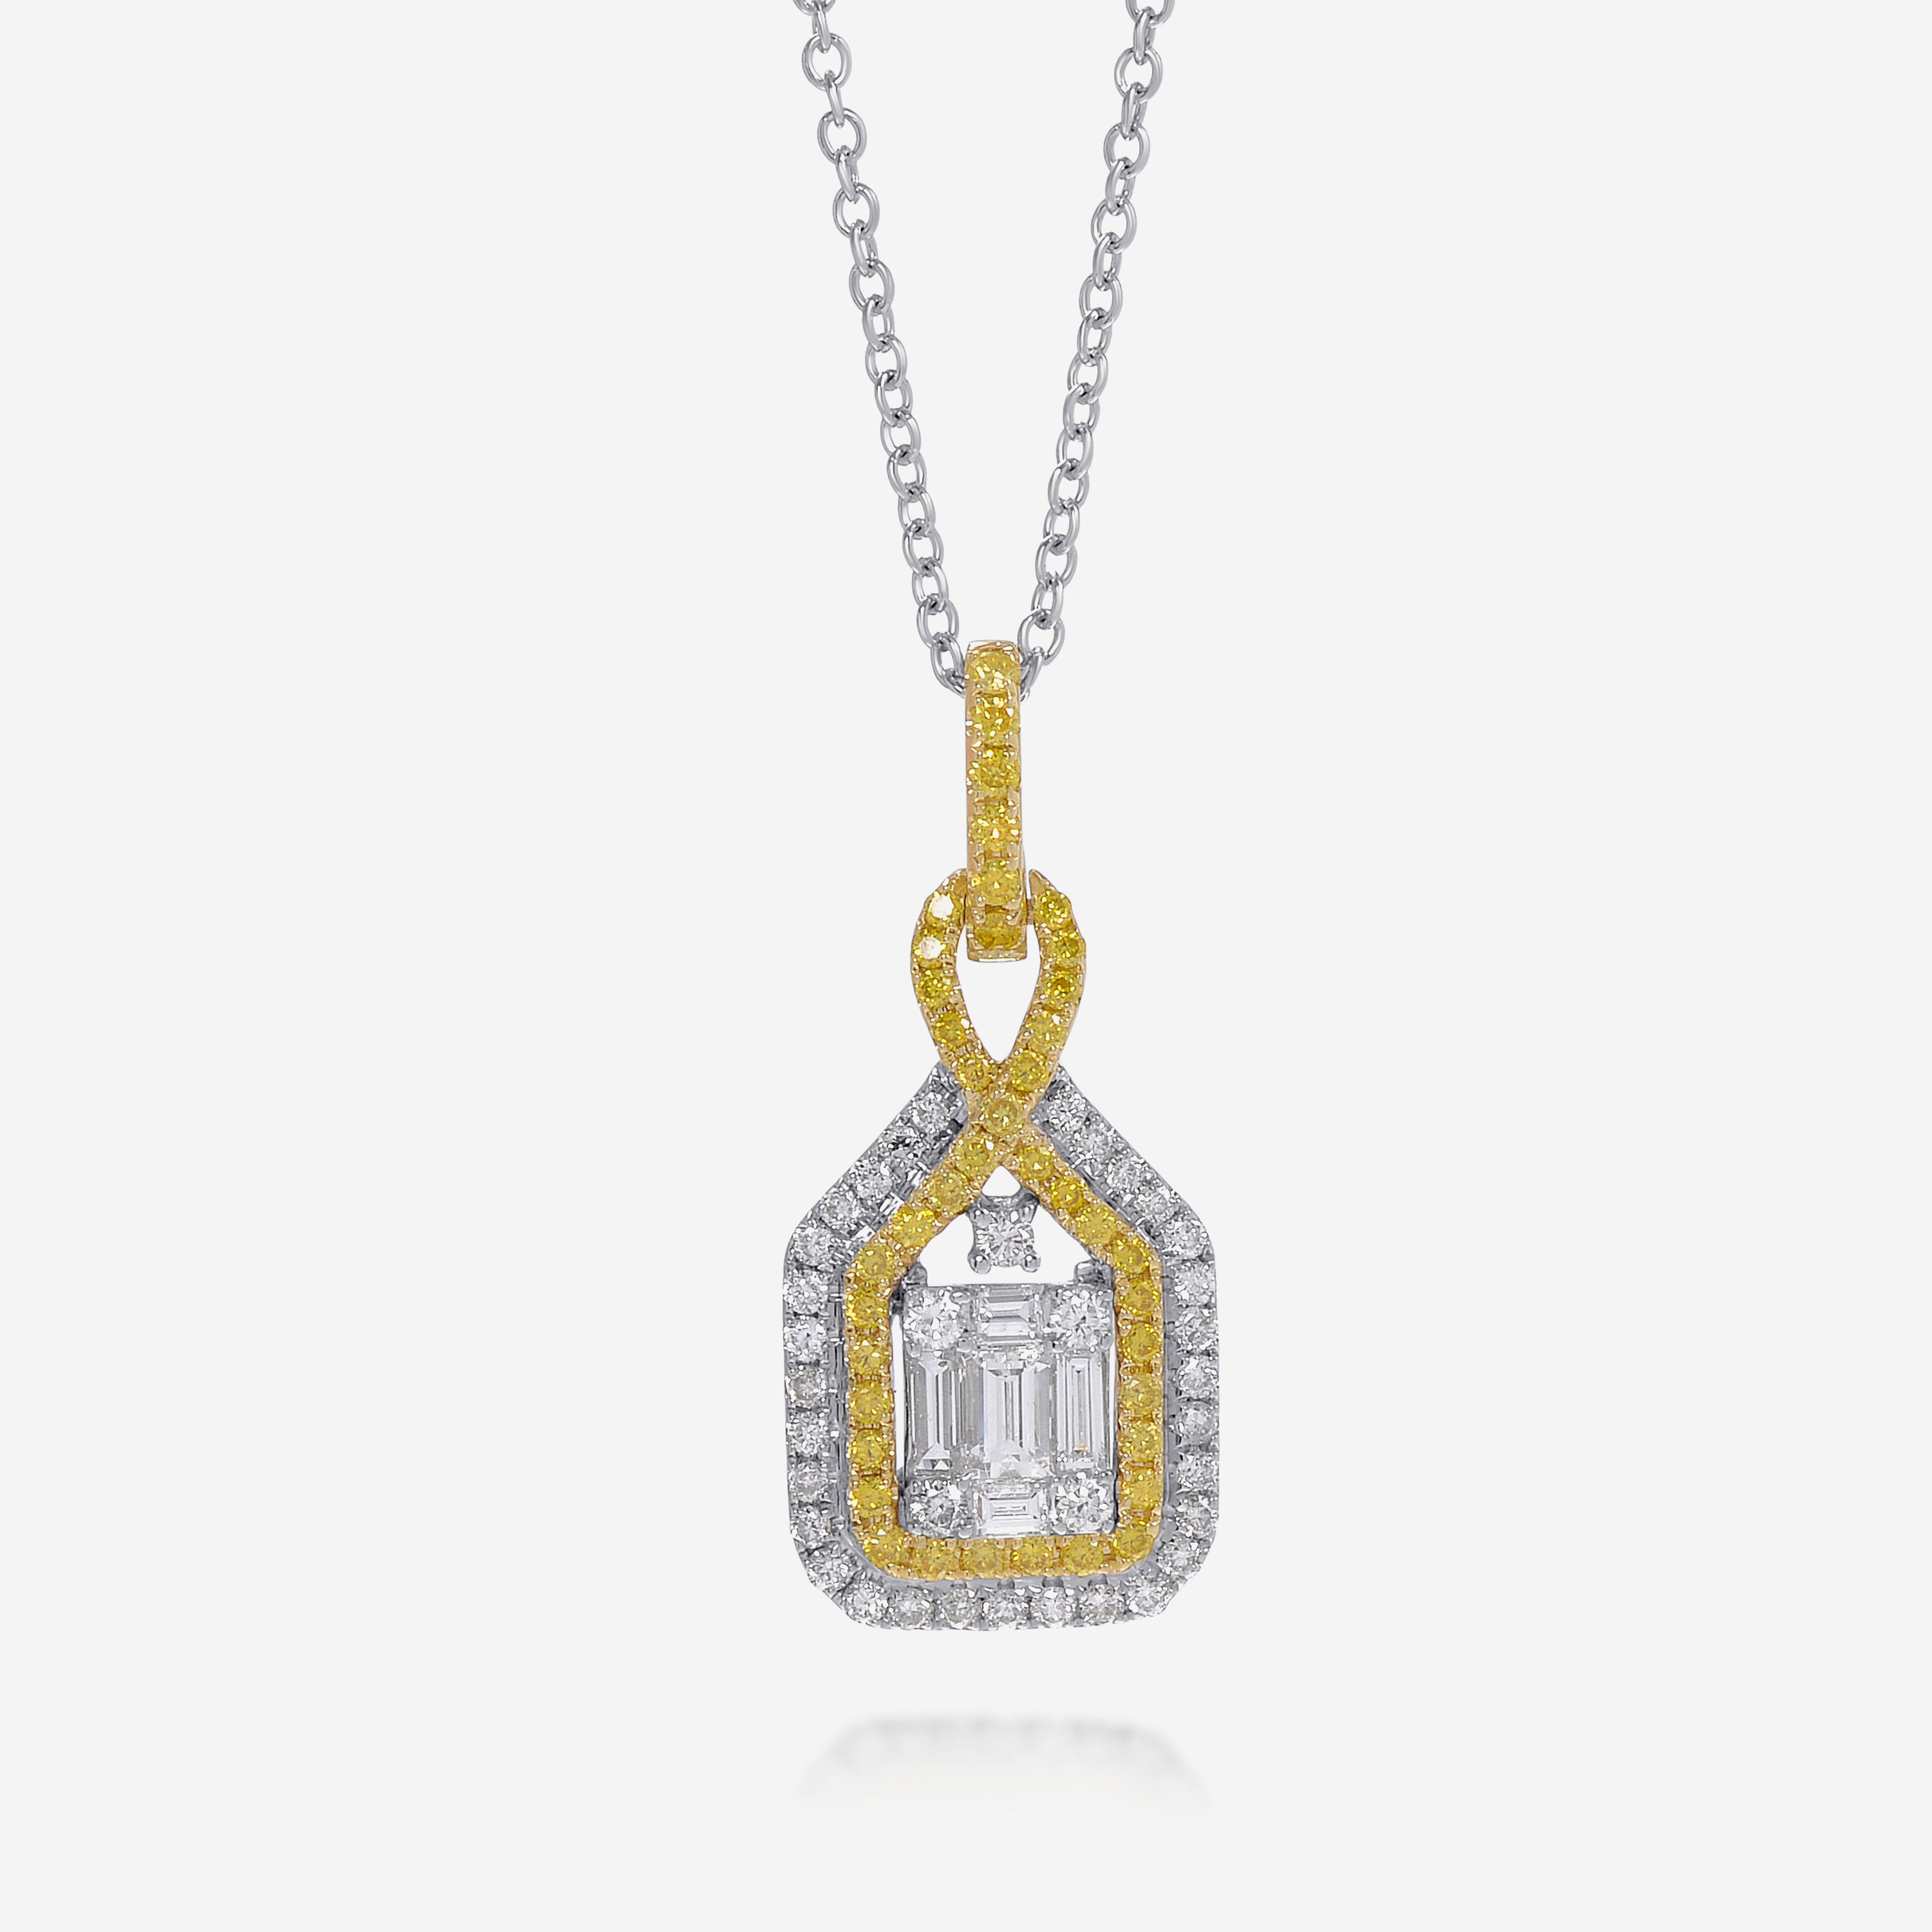 Gregg Ruth 14K White and Yellow Gold, White Diamond 0.47ct. tw. and Fancy Yellow Diamond Pendant Necklace 47285 - THE SOLIST